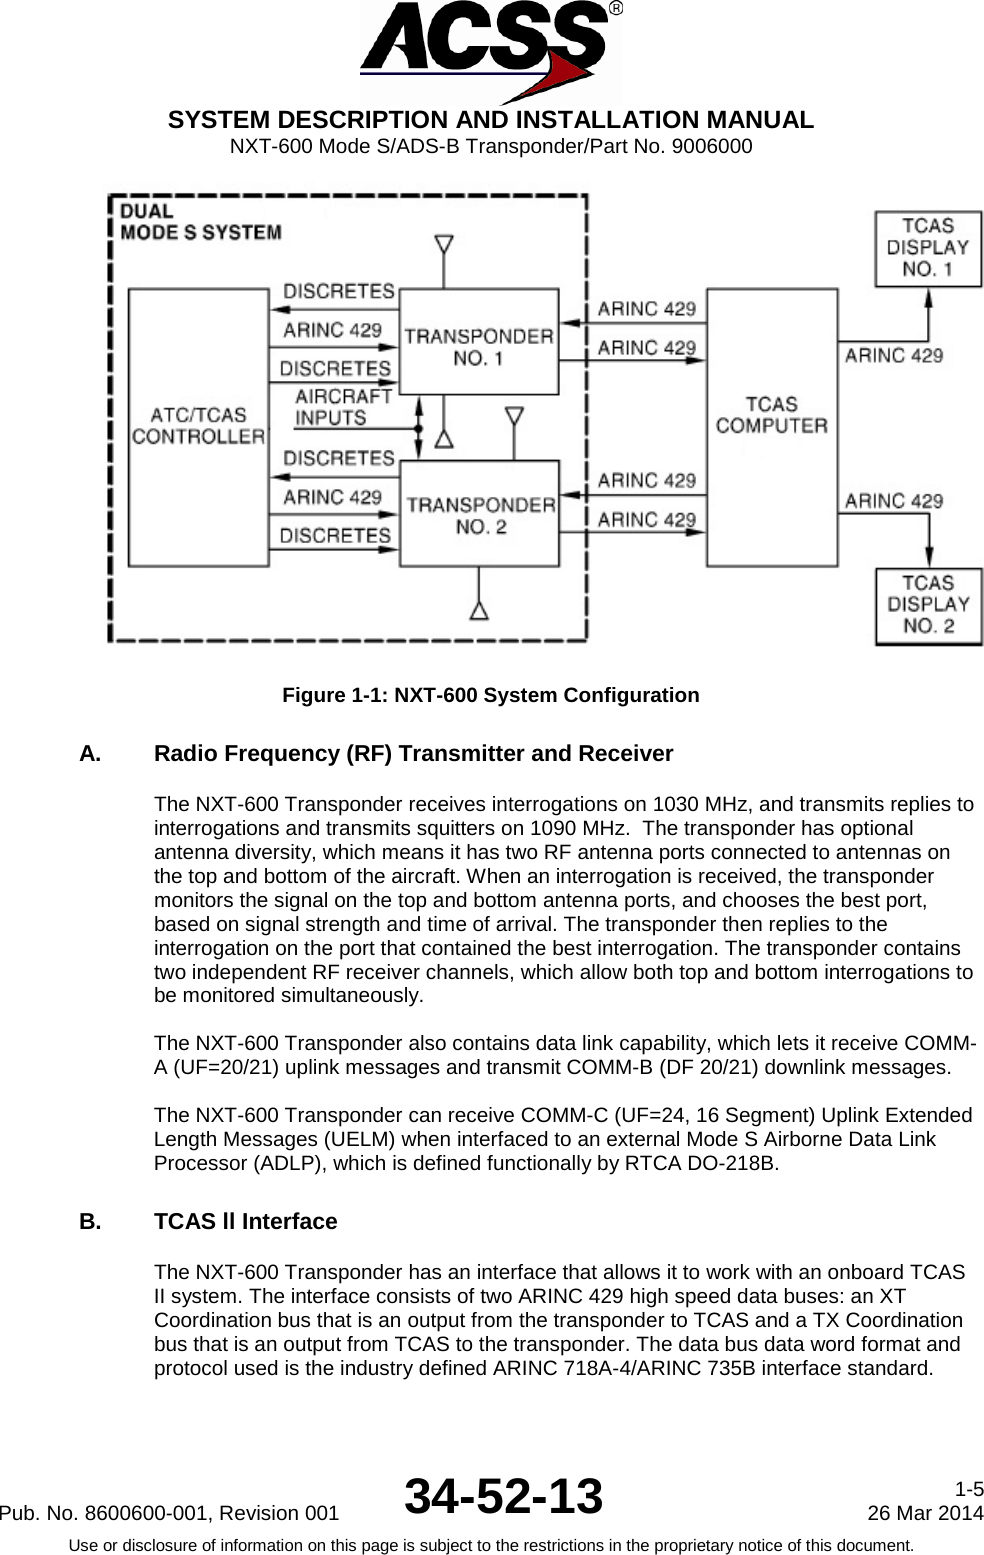  SYSTEM DESCRIPTION AND INSTALLATION MANUAL NXT-600 Mode S/ADS-B Transponder/Part No. 9006000  Figure 1-1: NXT-600 System Configuration A. Radio Frequency (RF) Transmitter and Receiver  The NXT-600 Transponder receives interrogations on 1030 MHz, and transmits replies to interrogations and transmits squitters on 1090 MHz.  The transponder has optional antenna diversity, which means it has two RF antenna ports connected to antennas on the top and bottom of the aircraft. When an interrogation is received, the transponder monitors the signal on the top and bottom antenna ports, and chooses the best port, based on signal strength and time of arrival. The transponder then replies to the interrogation on the port that contained the best interrogation. The transponder contains two independent RF receiver channels, which allow both top and bottom interrogations to be monitored simultaneously.   The NXT-600 Transponder also contains data link capability, which lets it receive COMM-A (UF=20/21) uplink messages and transmit COMM-B (DF 20/21) downlink messages.   The NXT-600 Transponder can receive COMM-C (UF=24, 16 Segment) Uplink Extended Length Messages (UELM) when interfaced to an external Mode S Airborne Data Link Processor (ADLP), which is defined functionally by RTCA DO-218B.  B. TCAS ll Interface  The NXT-600 Transponder has an interface that allows it to work with an onboard TCAS II system. The interface consists of two ARINC 429 high speed data buses: an XT Coordination bus that is an output from the transponder to TCAS and a TX Coordination bus that is an output from TCAS to the transponder. The data bus data word format and protocol used is the industry defined ARINC 718A-4/ARINC 735B interface standard.  Pub. No. 8600600-001, Revision 001 34-52-13 1-5 26 Mar 2014 Use or disclosure of information on this page is subject to the restrictions in the proprietary notice of this document.     